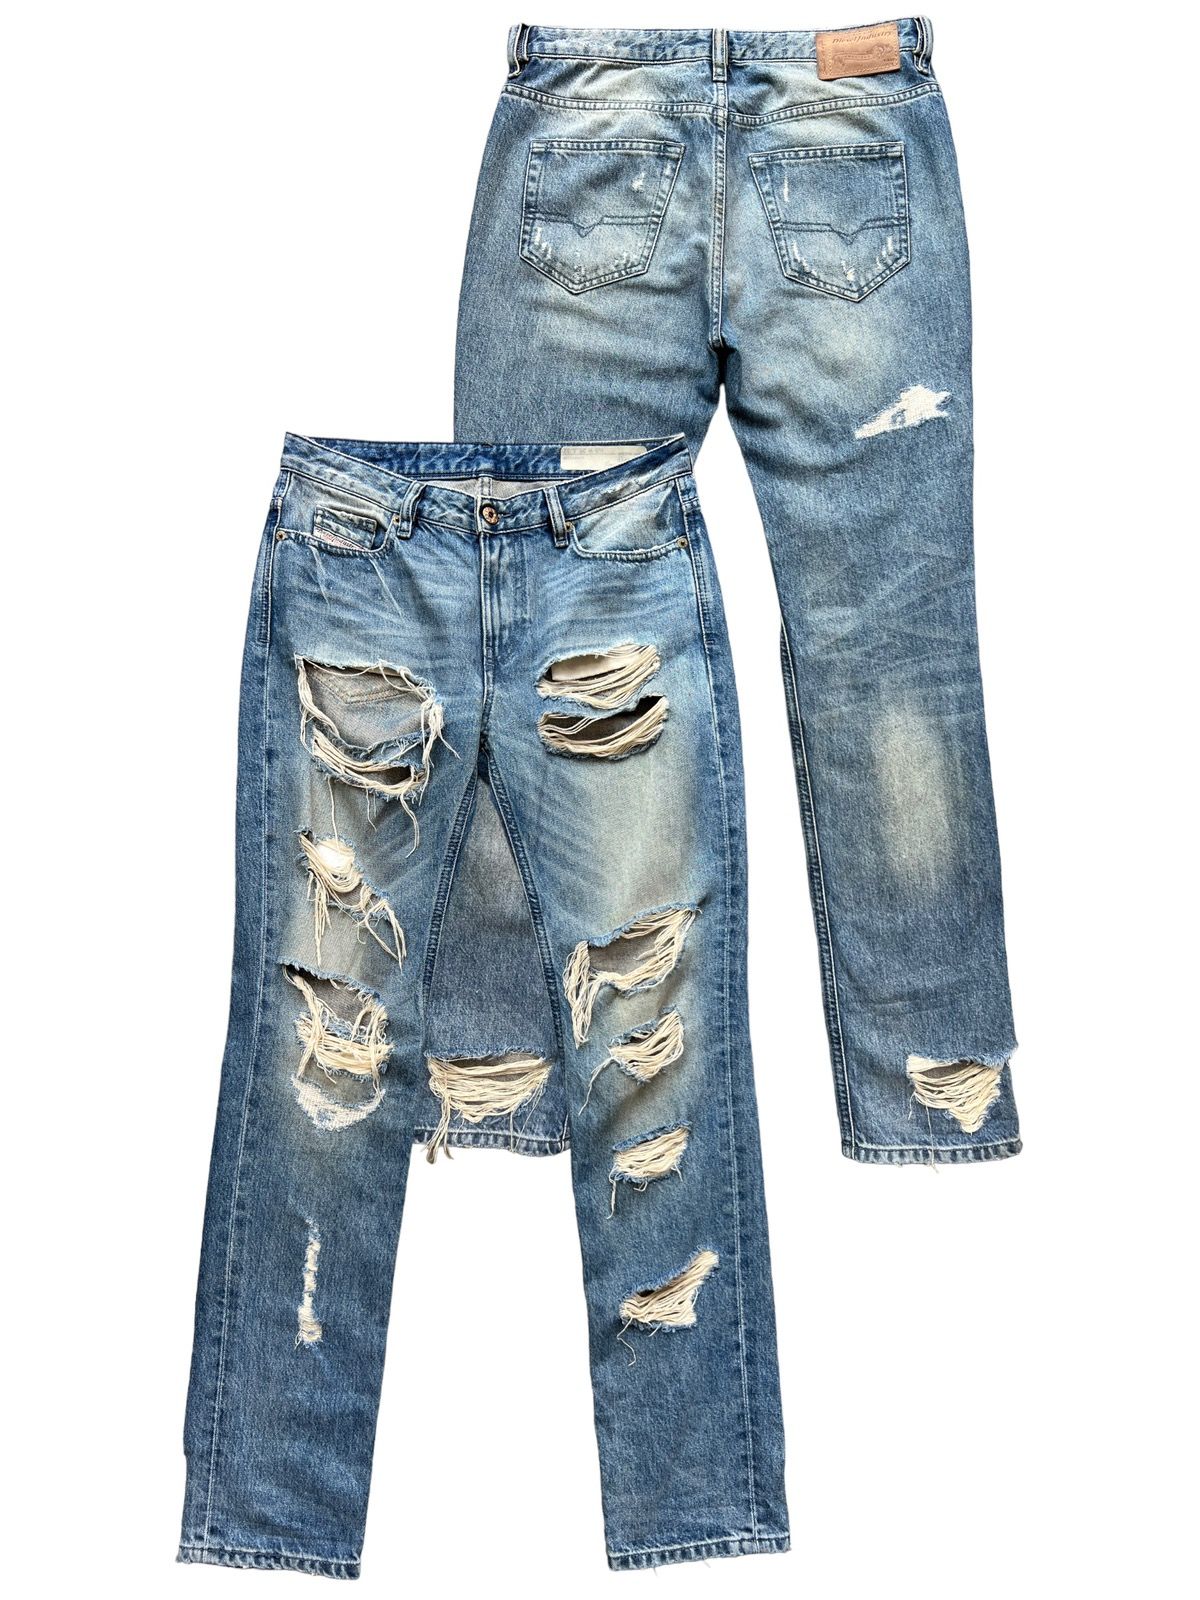 💥Rare💥 Diesel Distressed Ripped Thrashed Denim Jeans 31x31.5 - 1